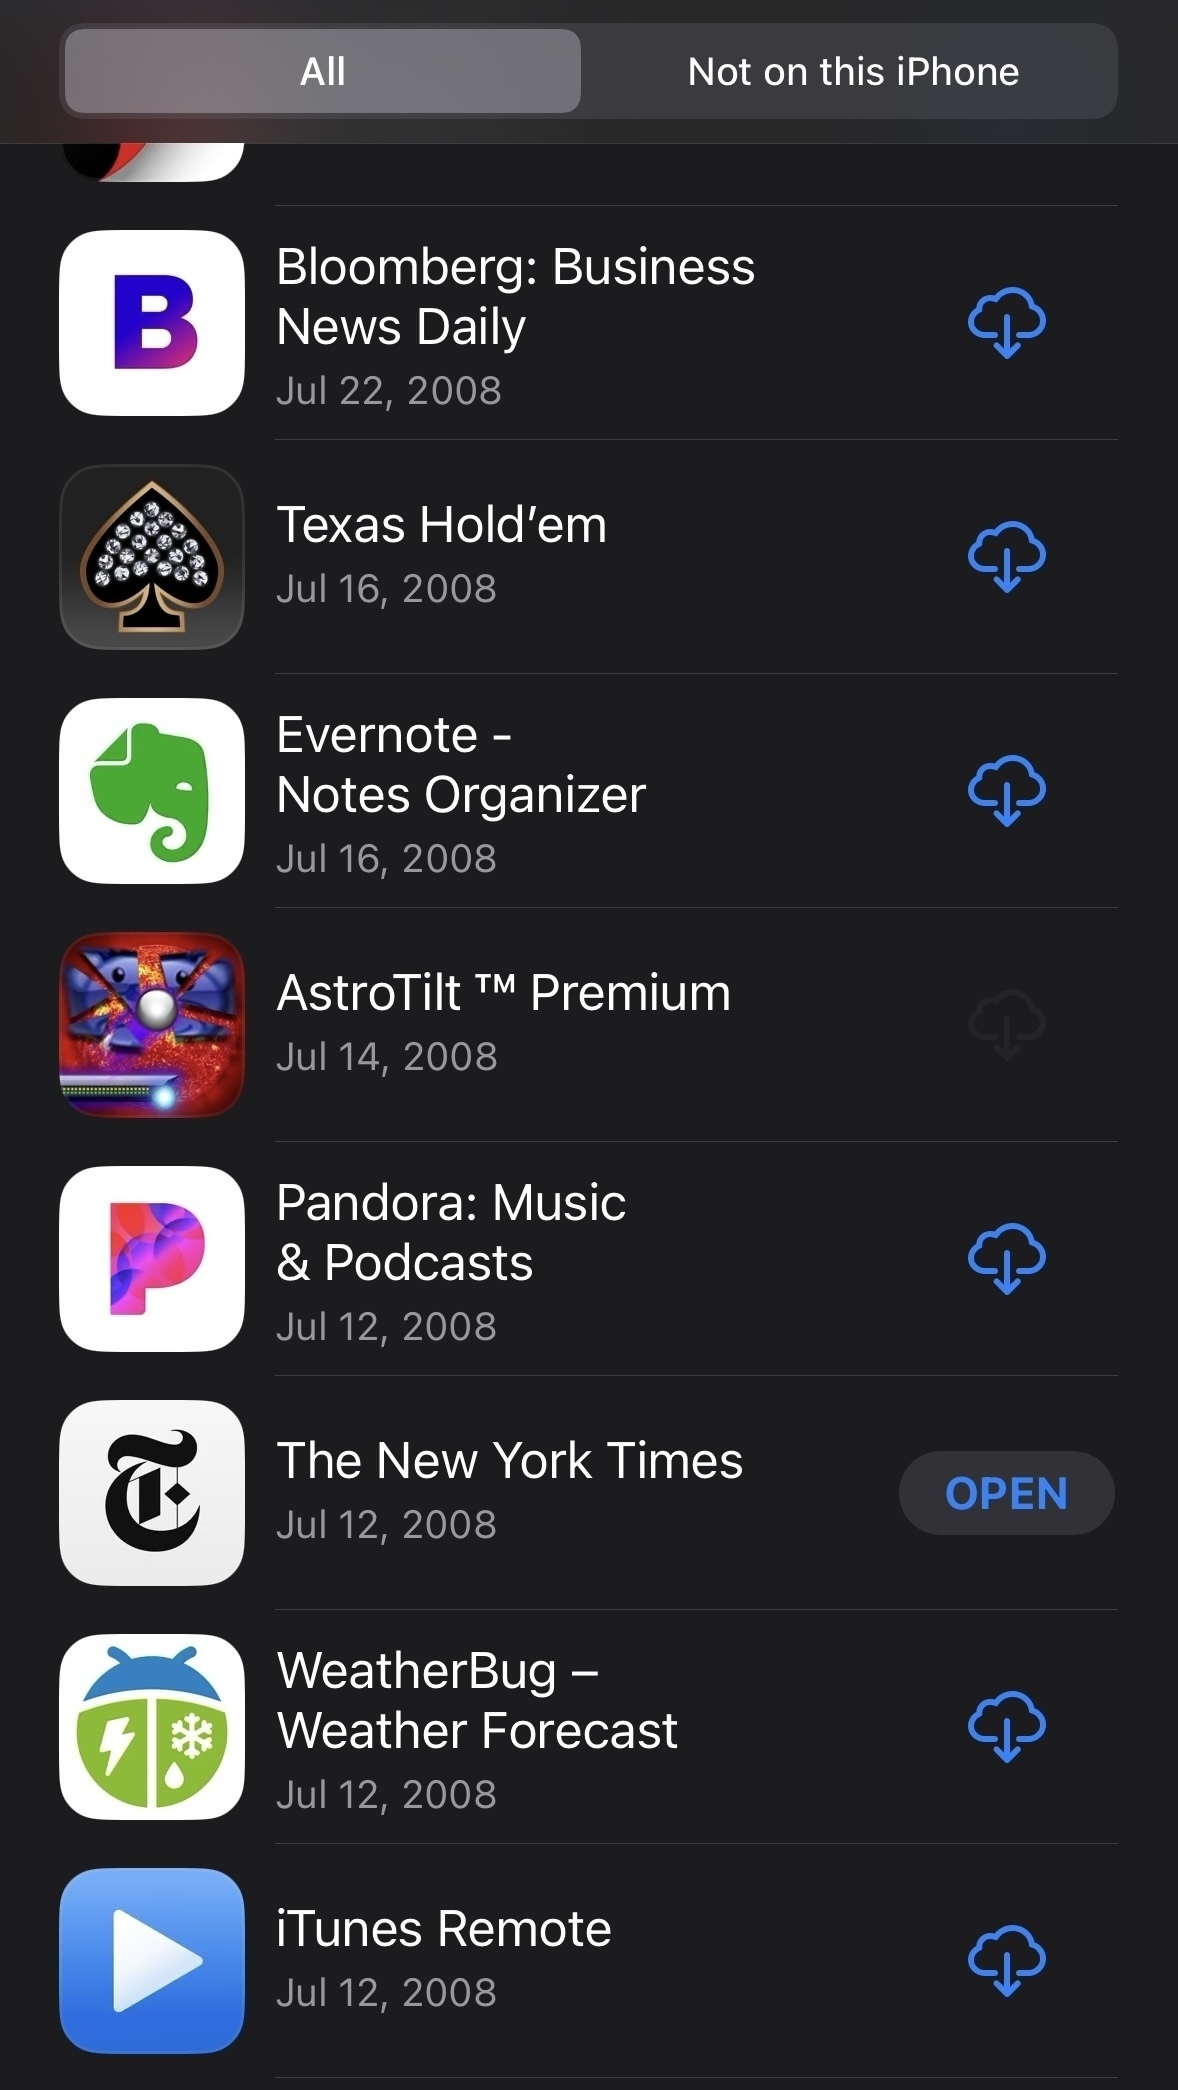 Screenshot of first apps installed: iTunes Remote, WeatherBug, New York Times, Pandora, AstroTilt, Evernote, Texas Hold’em, and Bloomberg 